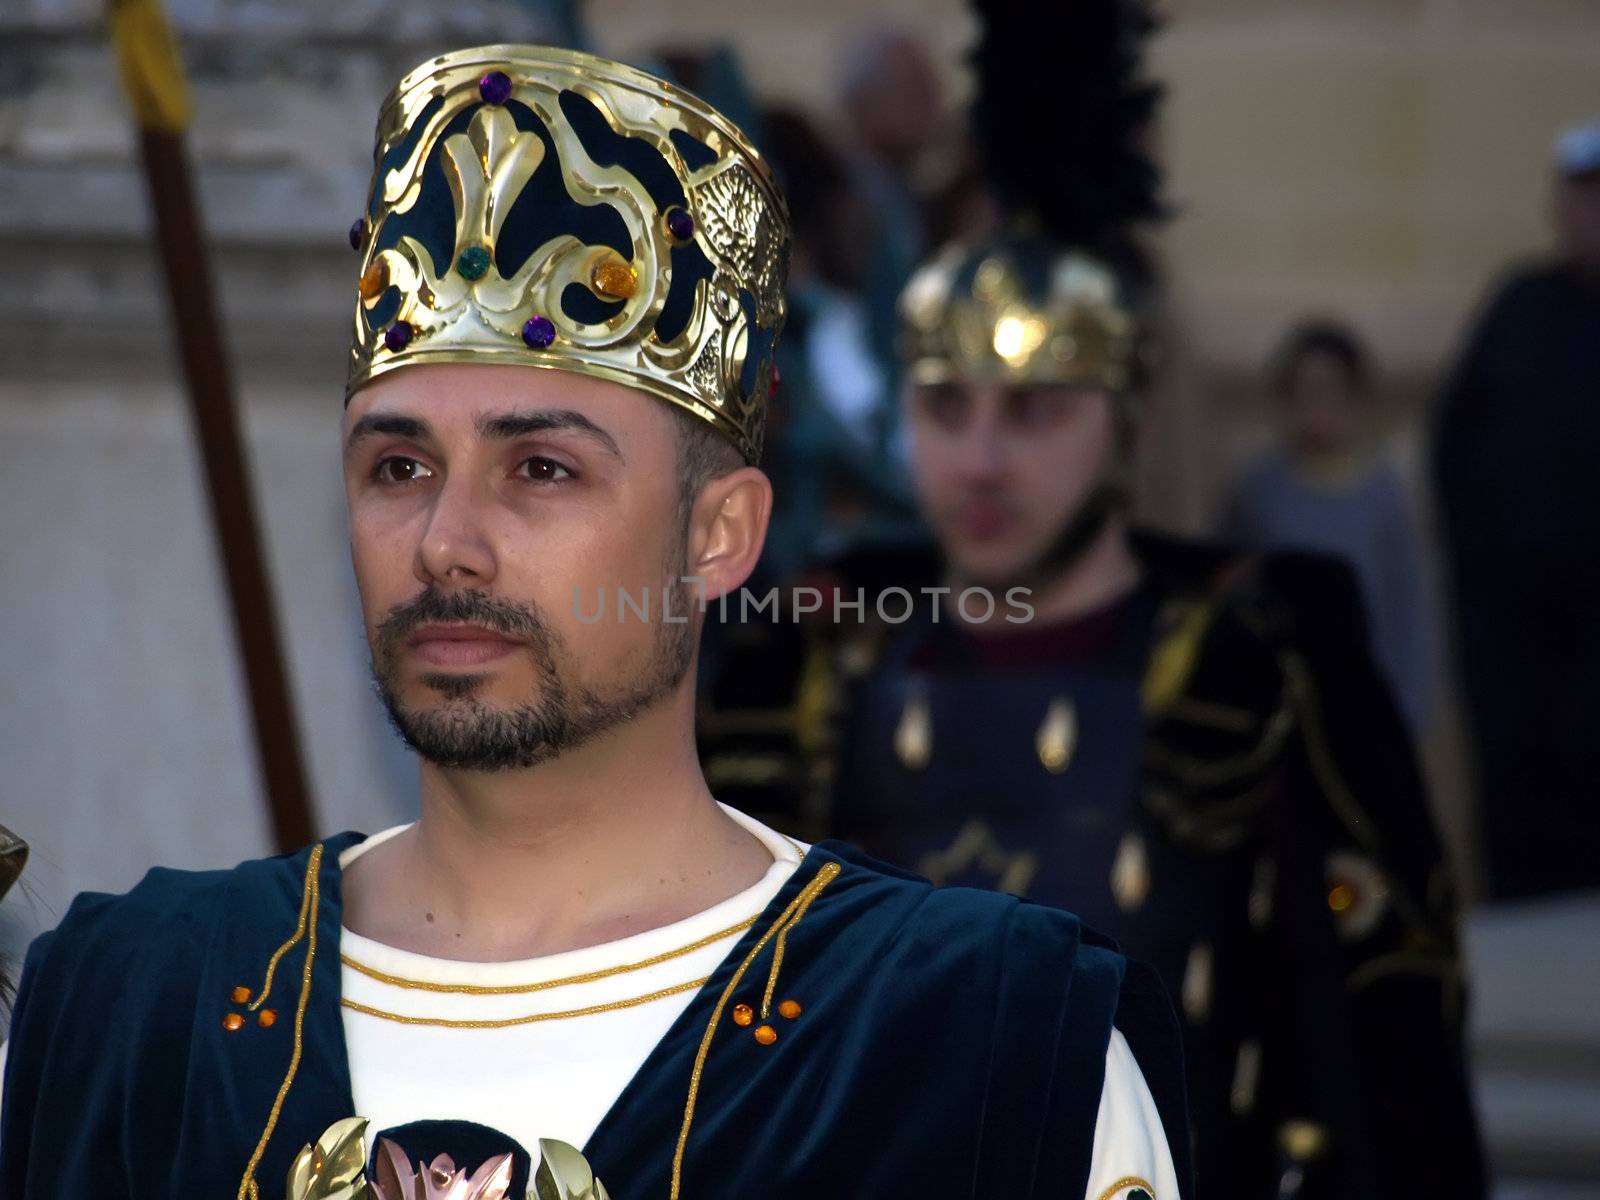 People dressed up as Egyptian rulers during reenactment of Biblical times  